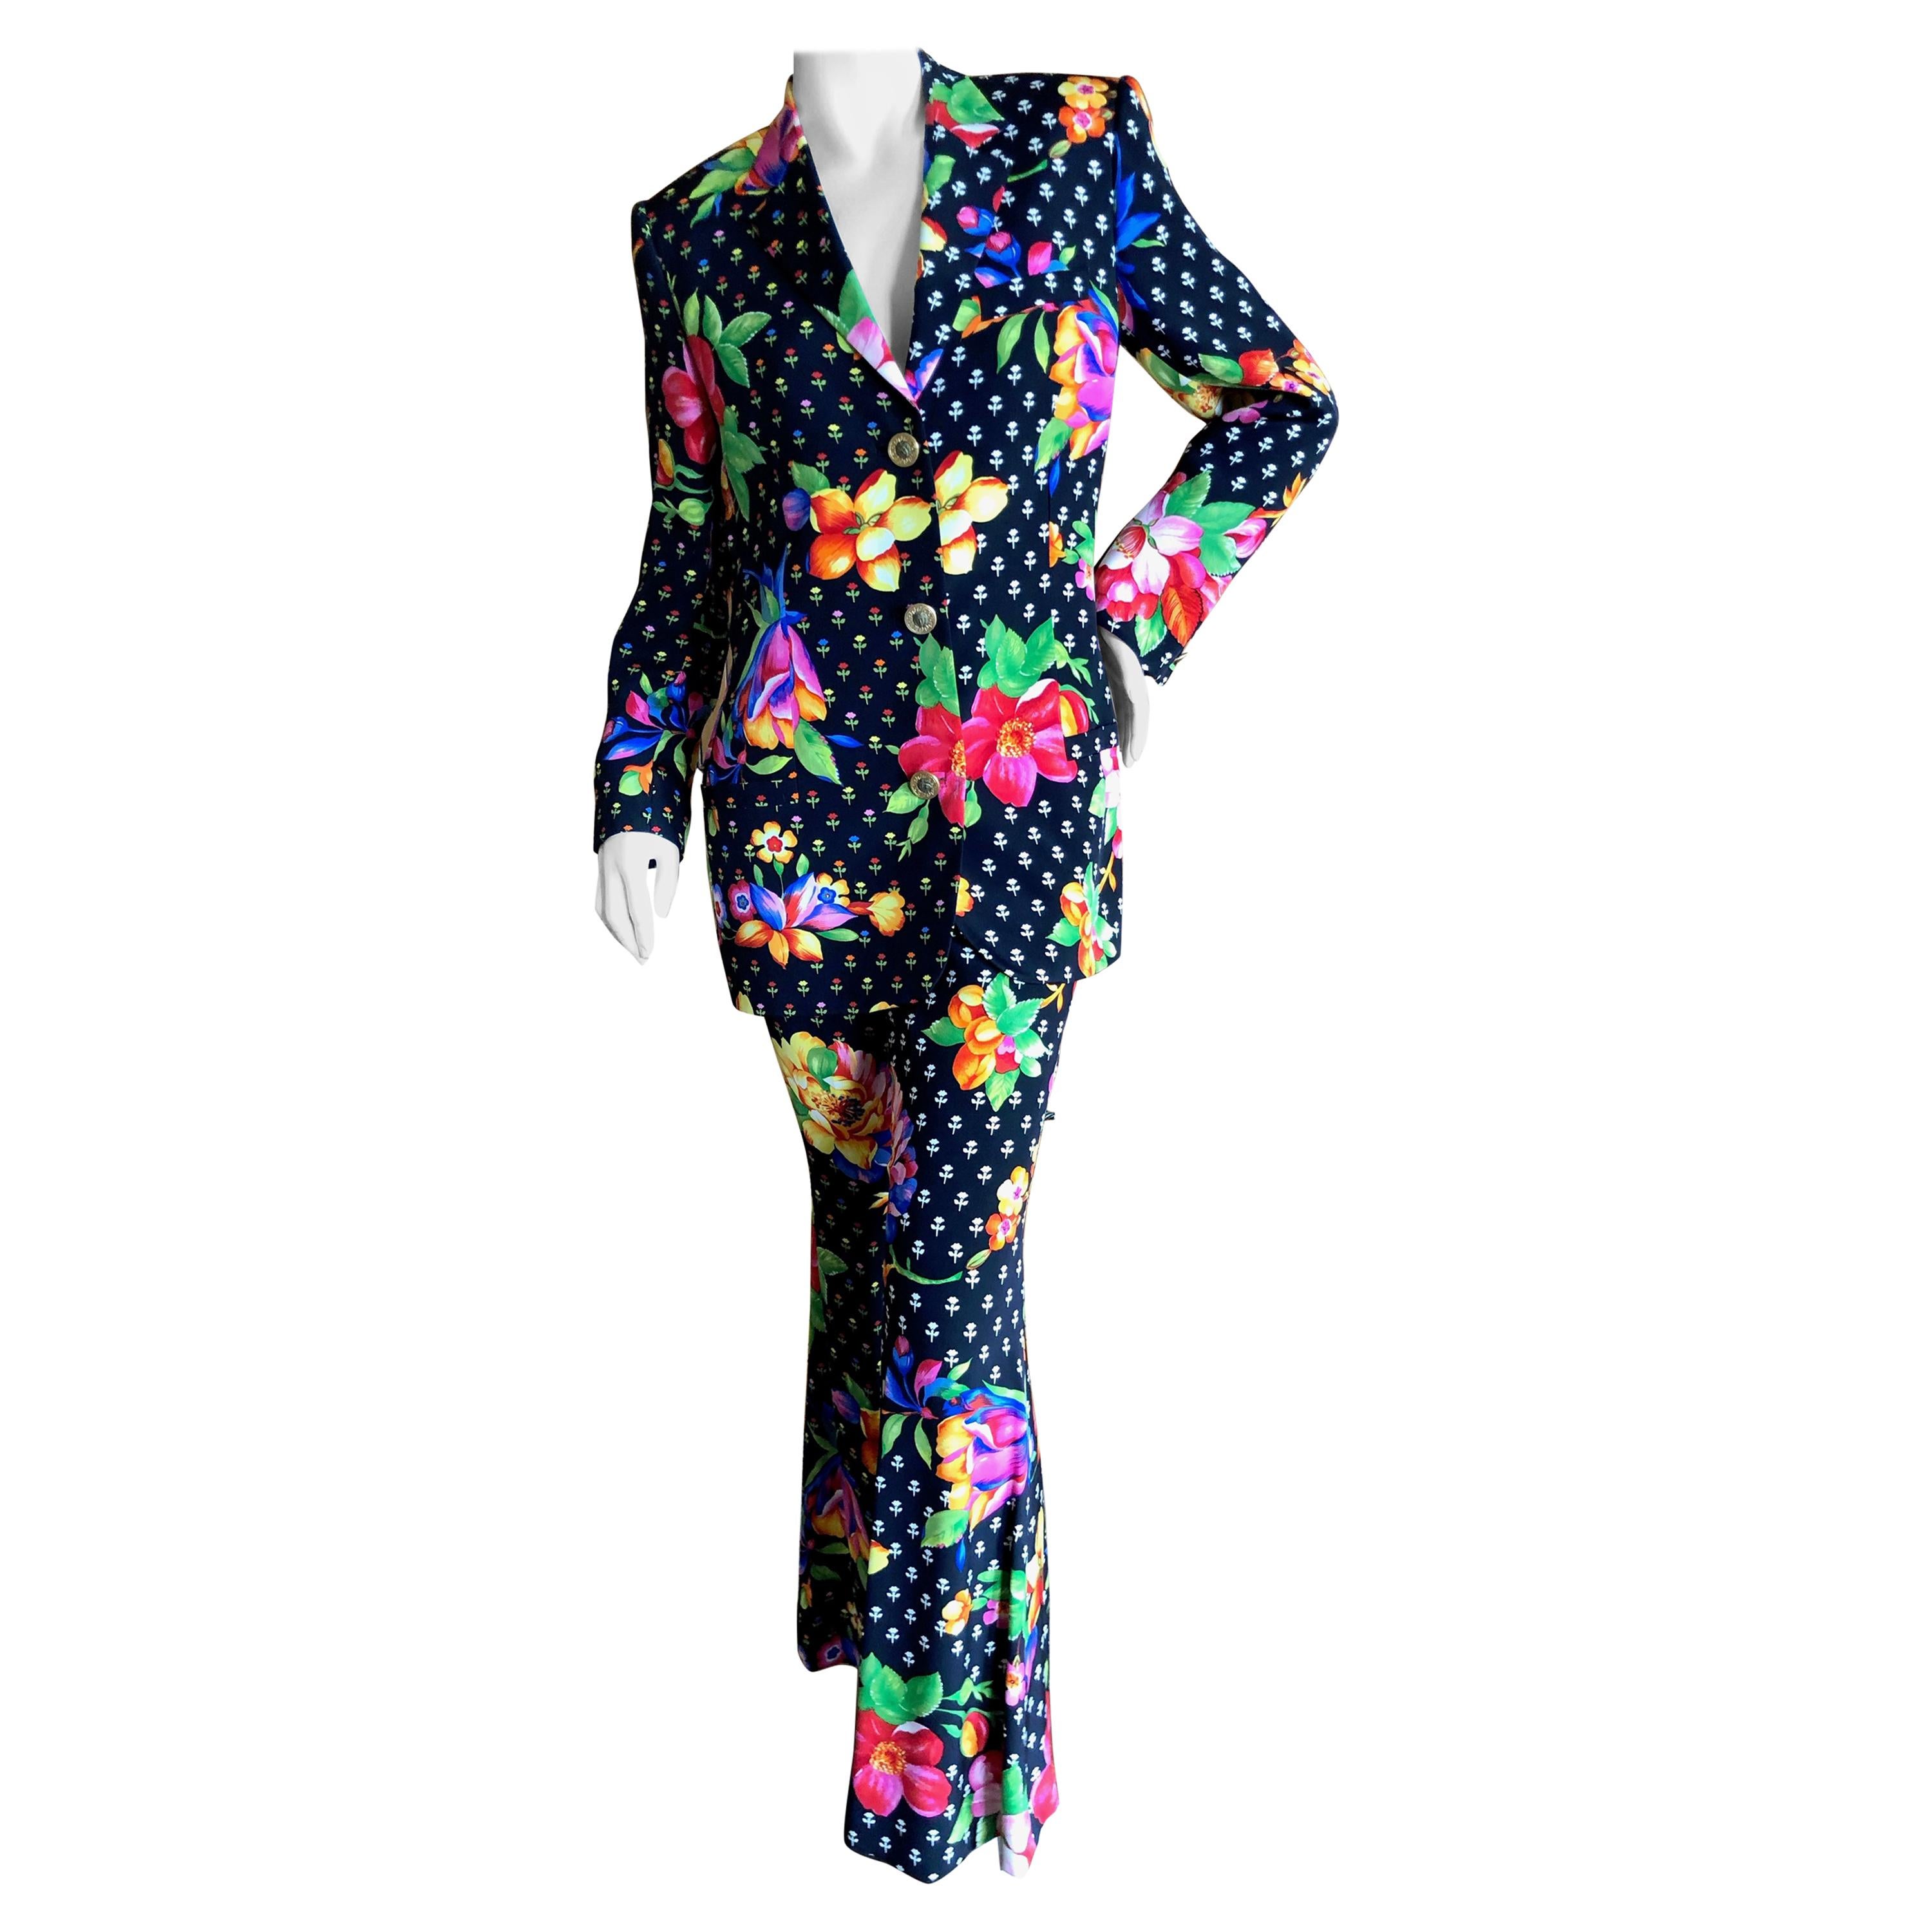 Gianni Versace Couture Fall 1992 Silk Floral Bell Bottom Pant Suit For Sale